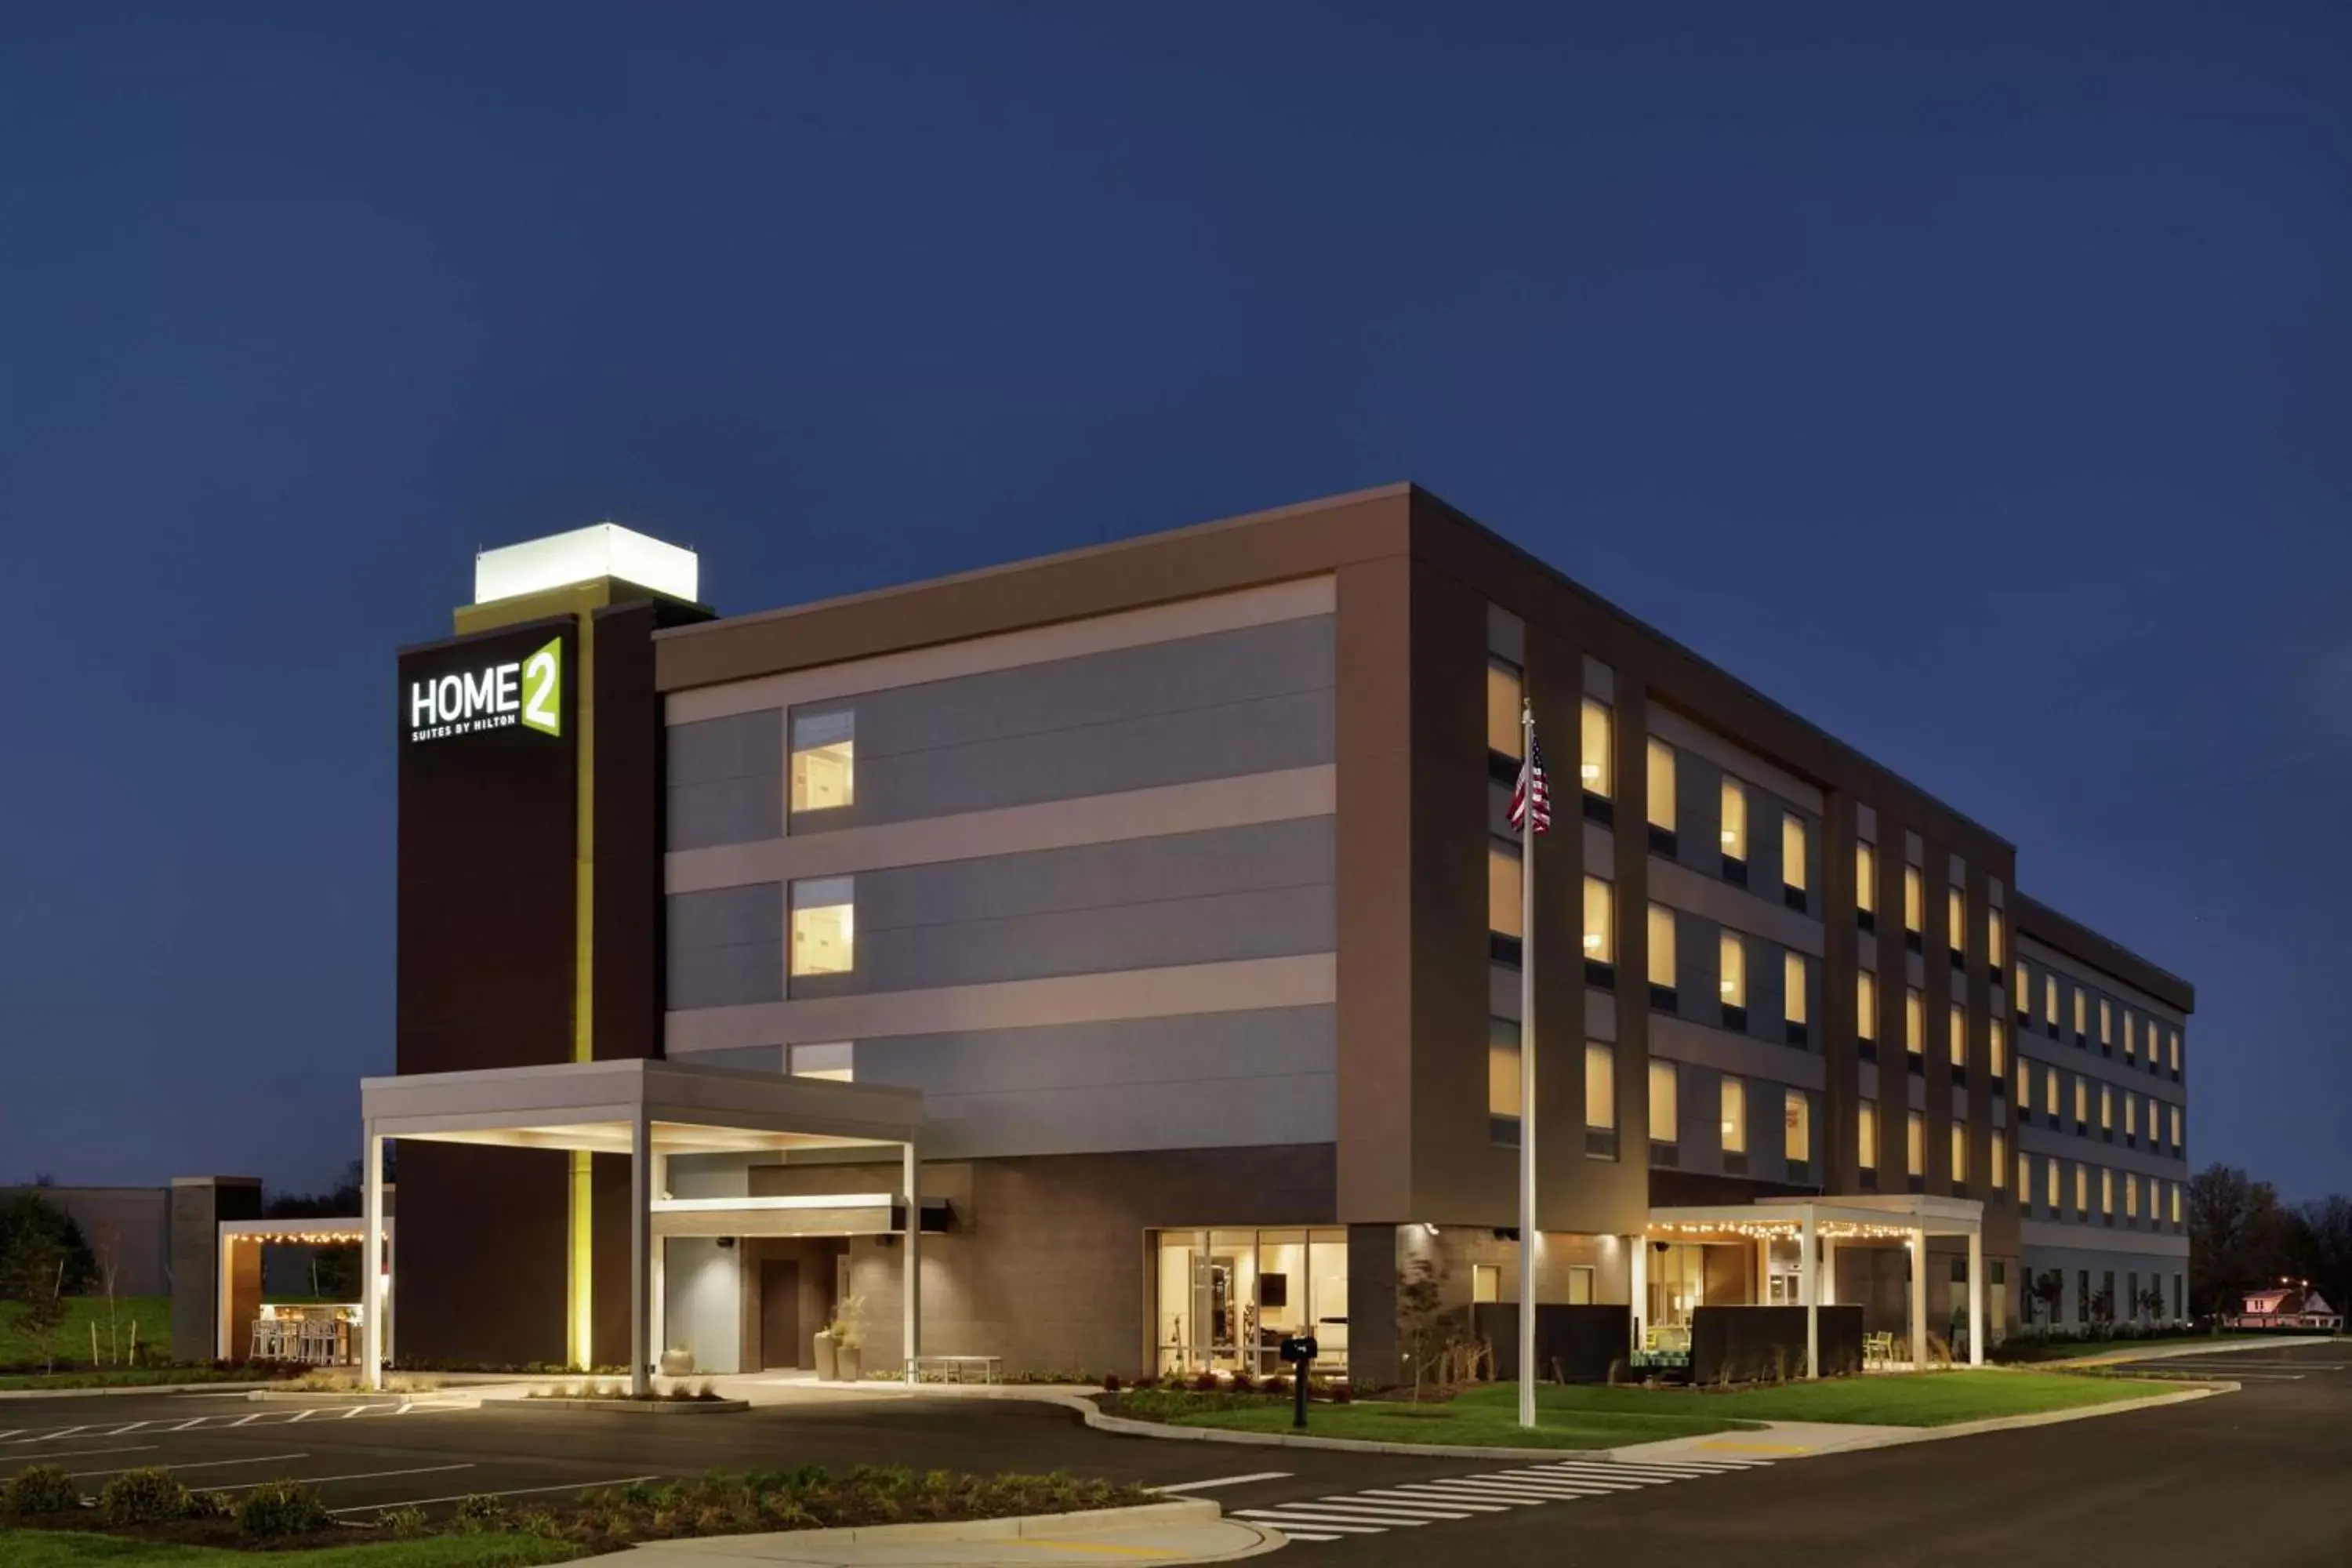 Property Building in Home2 Suites By Hilton Martinsburg, Wv